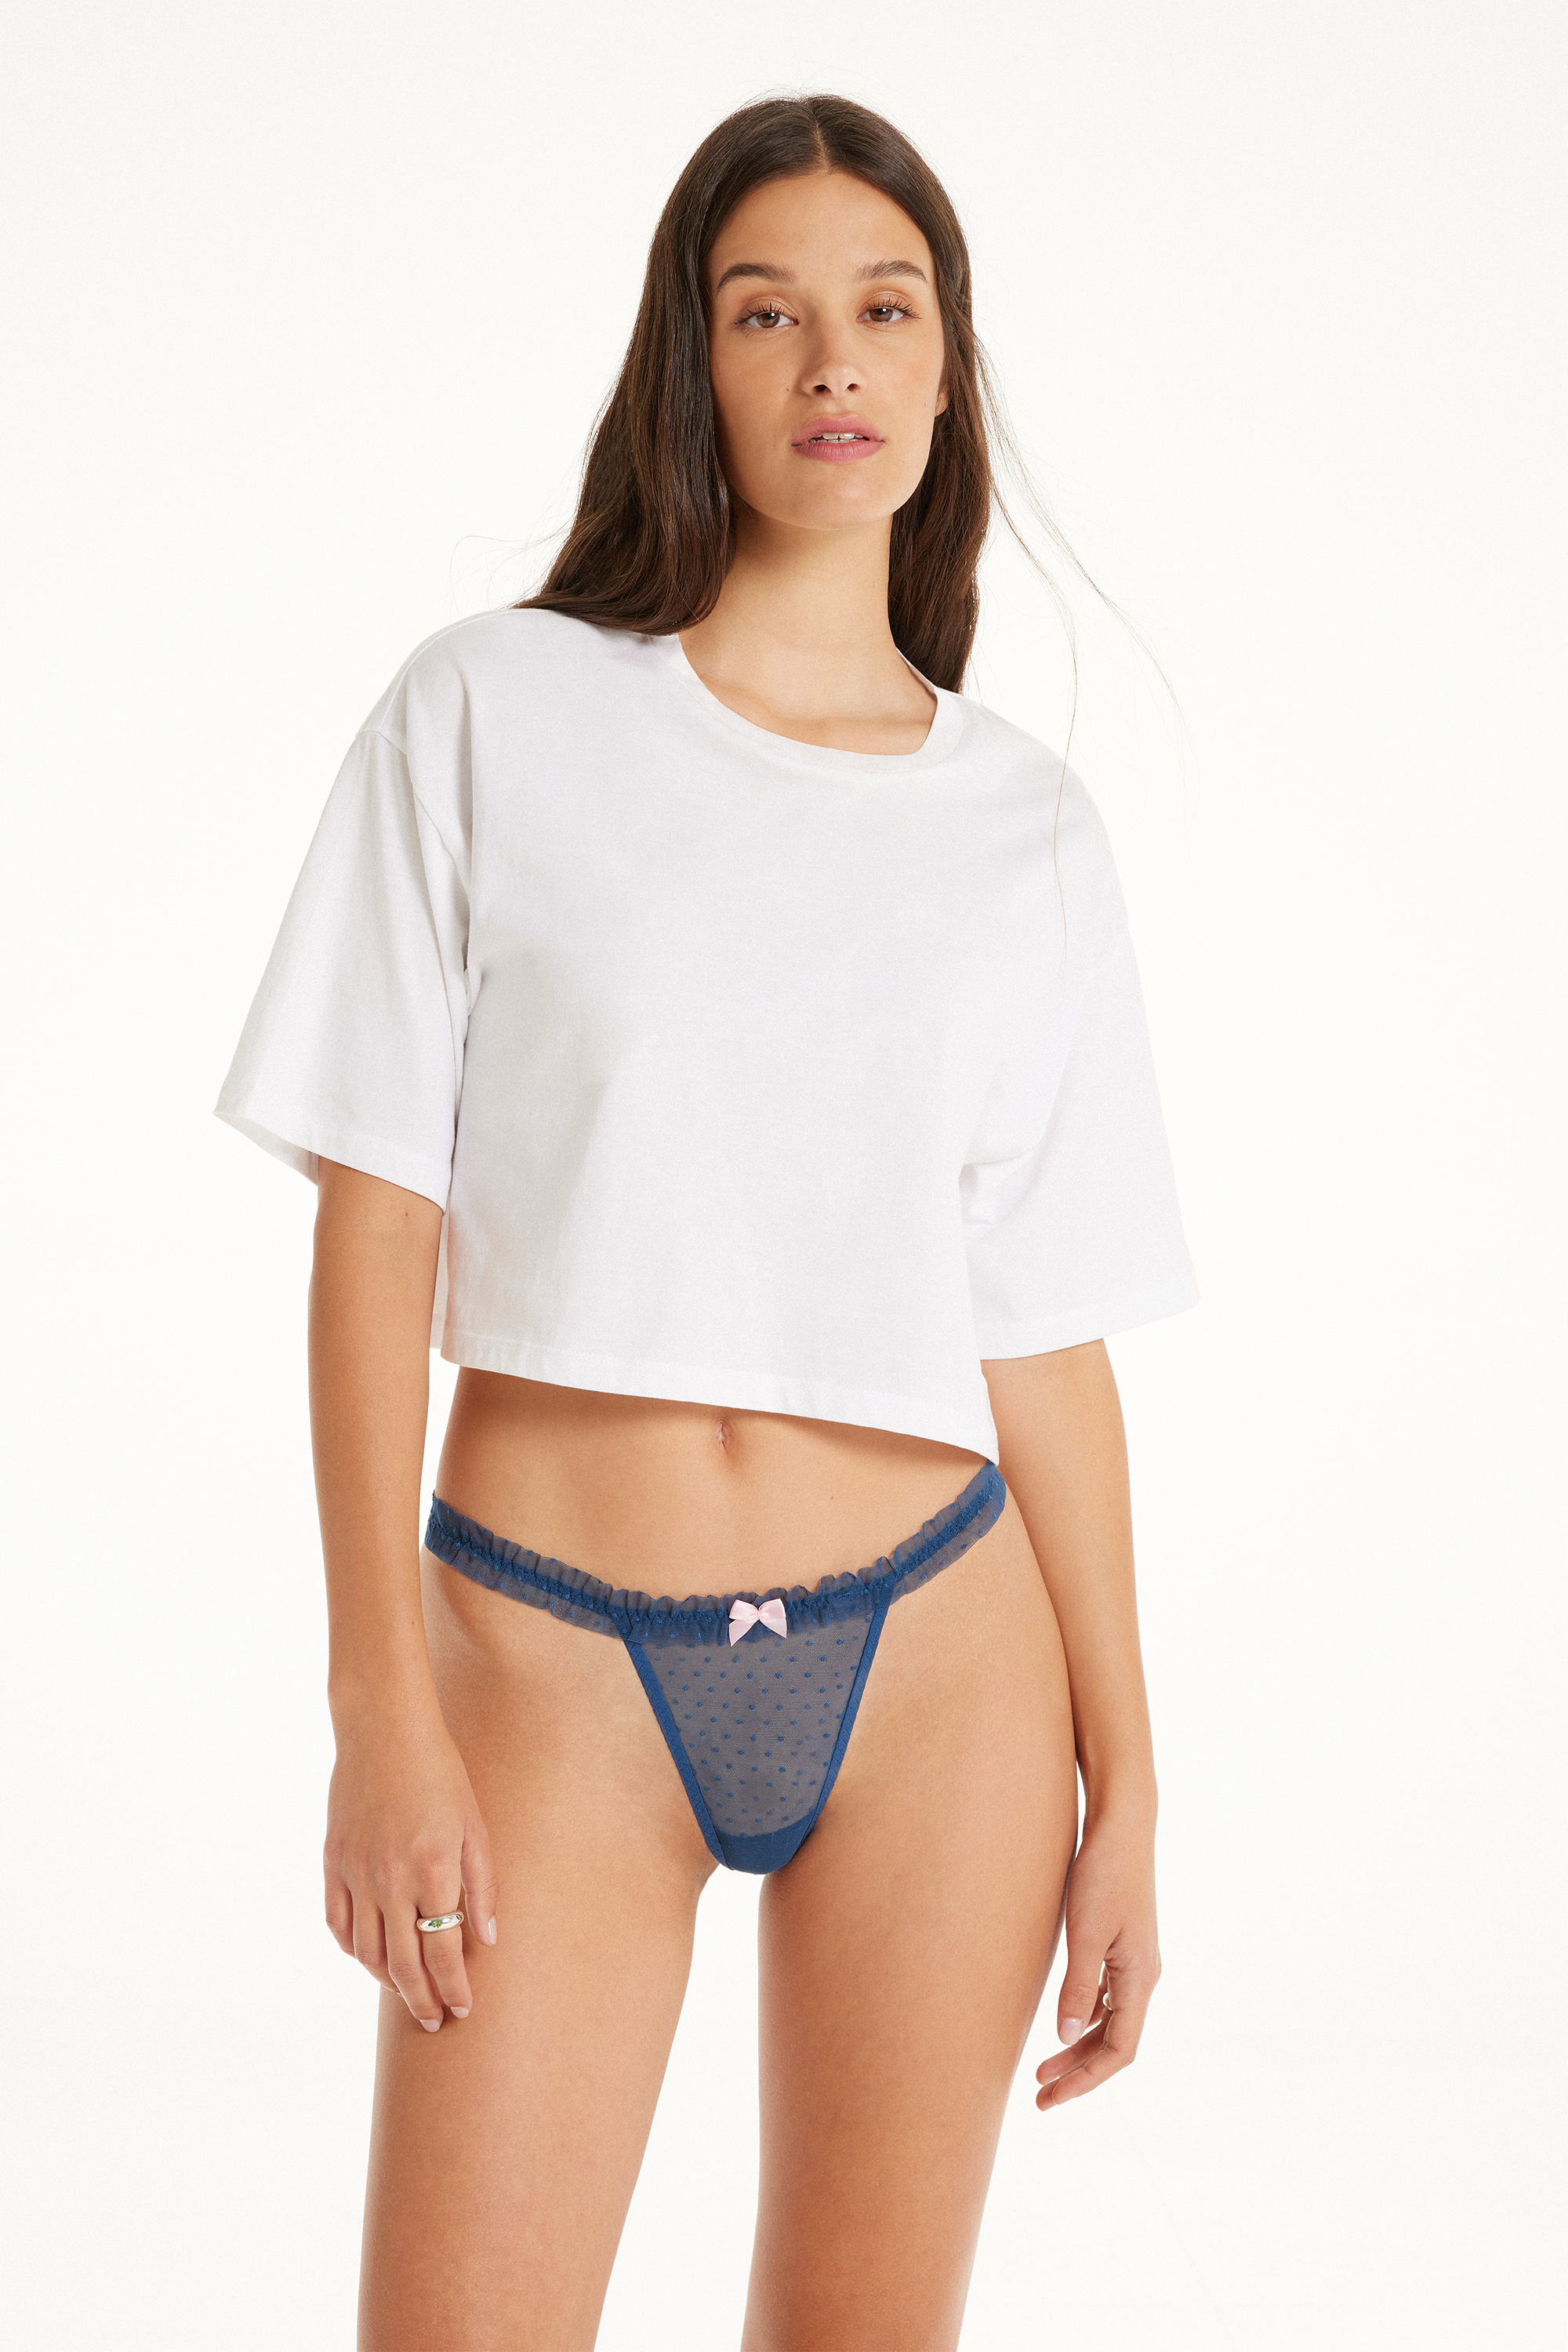 G-String With Thin Tanga-Style Panel and Ruching